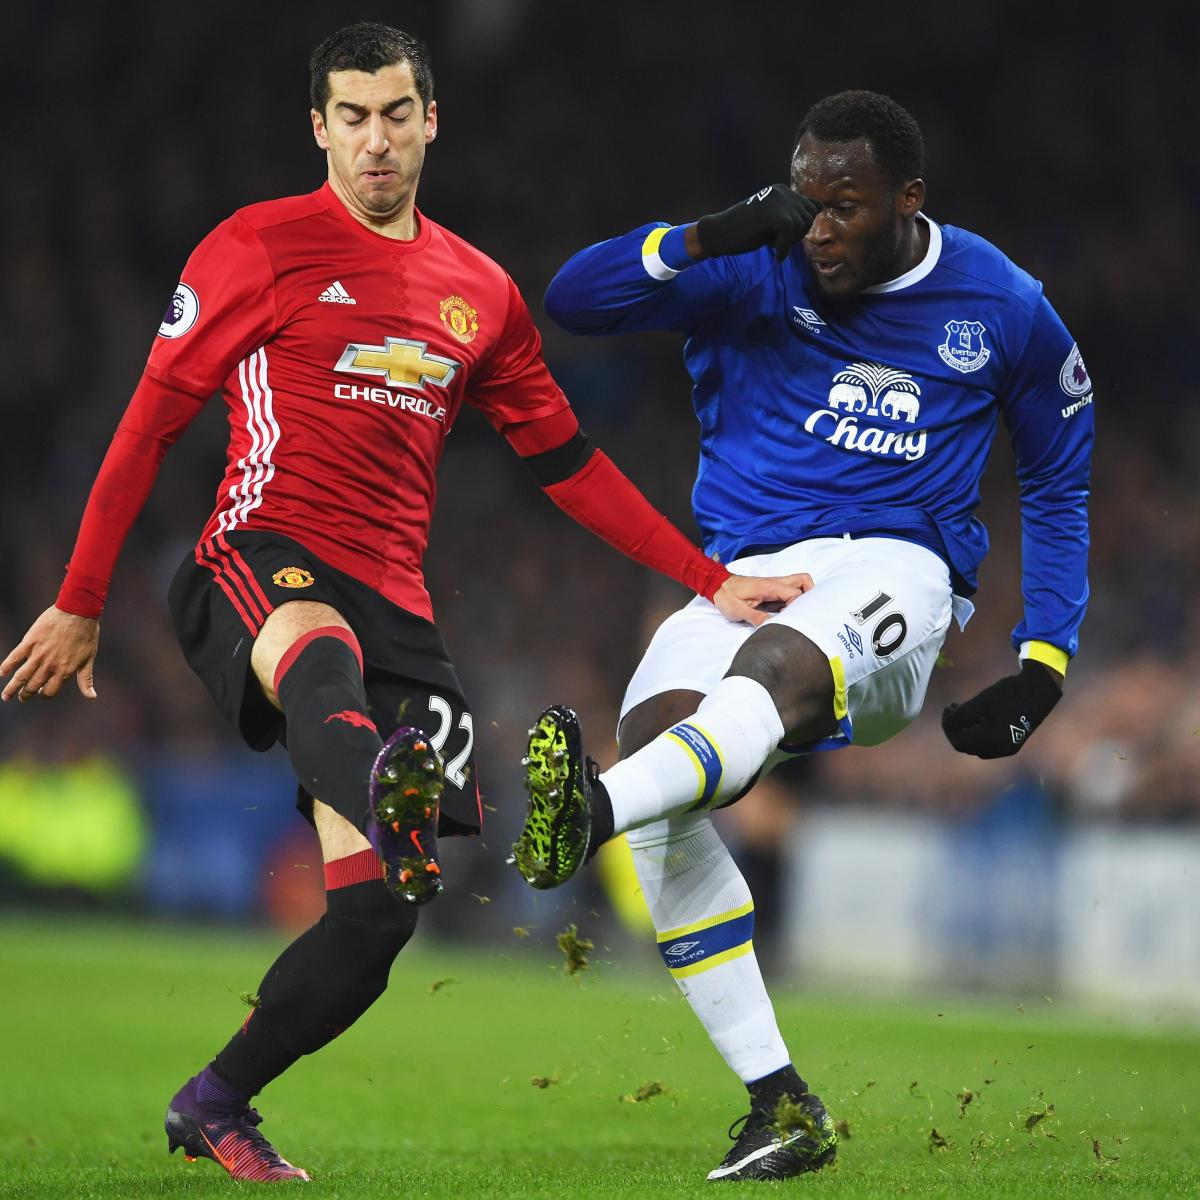 Everton Vs Manchester United Live Score Highlights From Premier League Game Bleacher Report Latest News Videos And Highlights